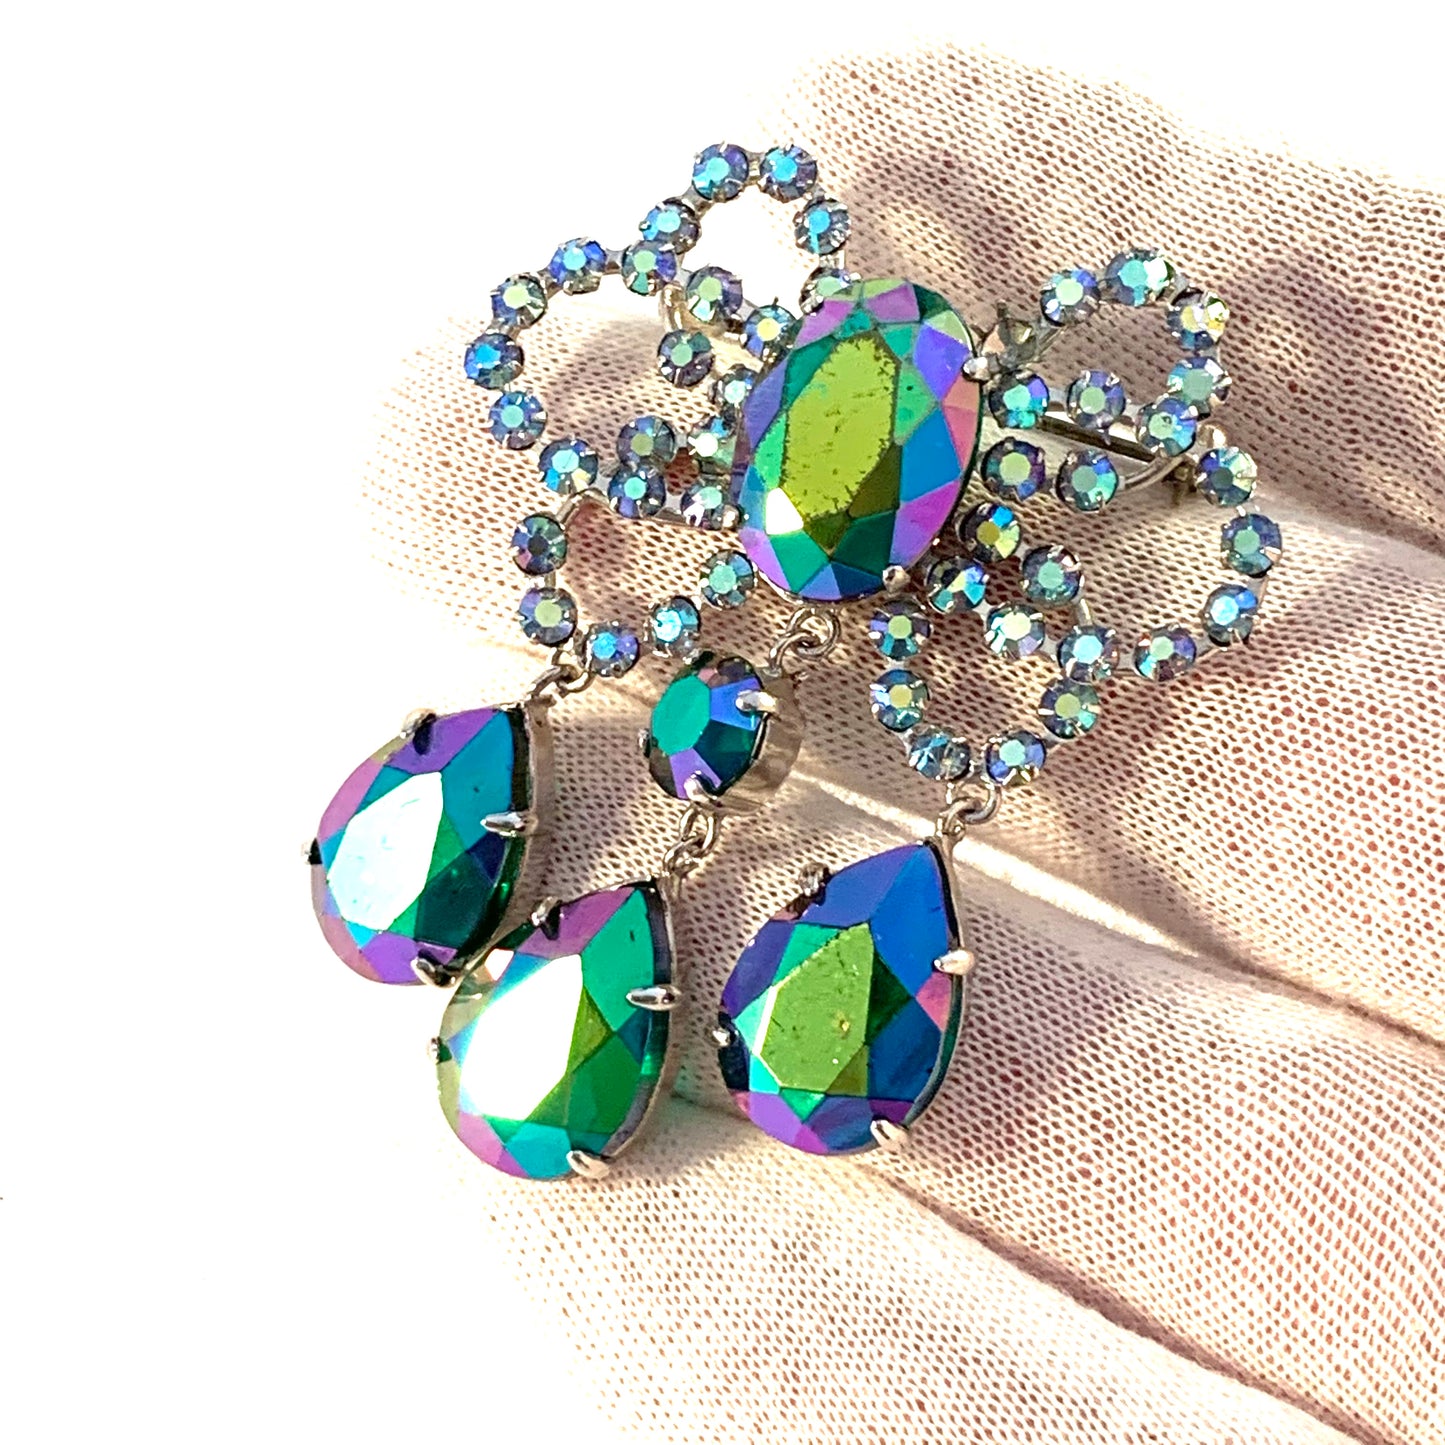 Christian Dior, Vintage Costume Jewelry Brooch